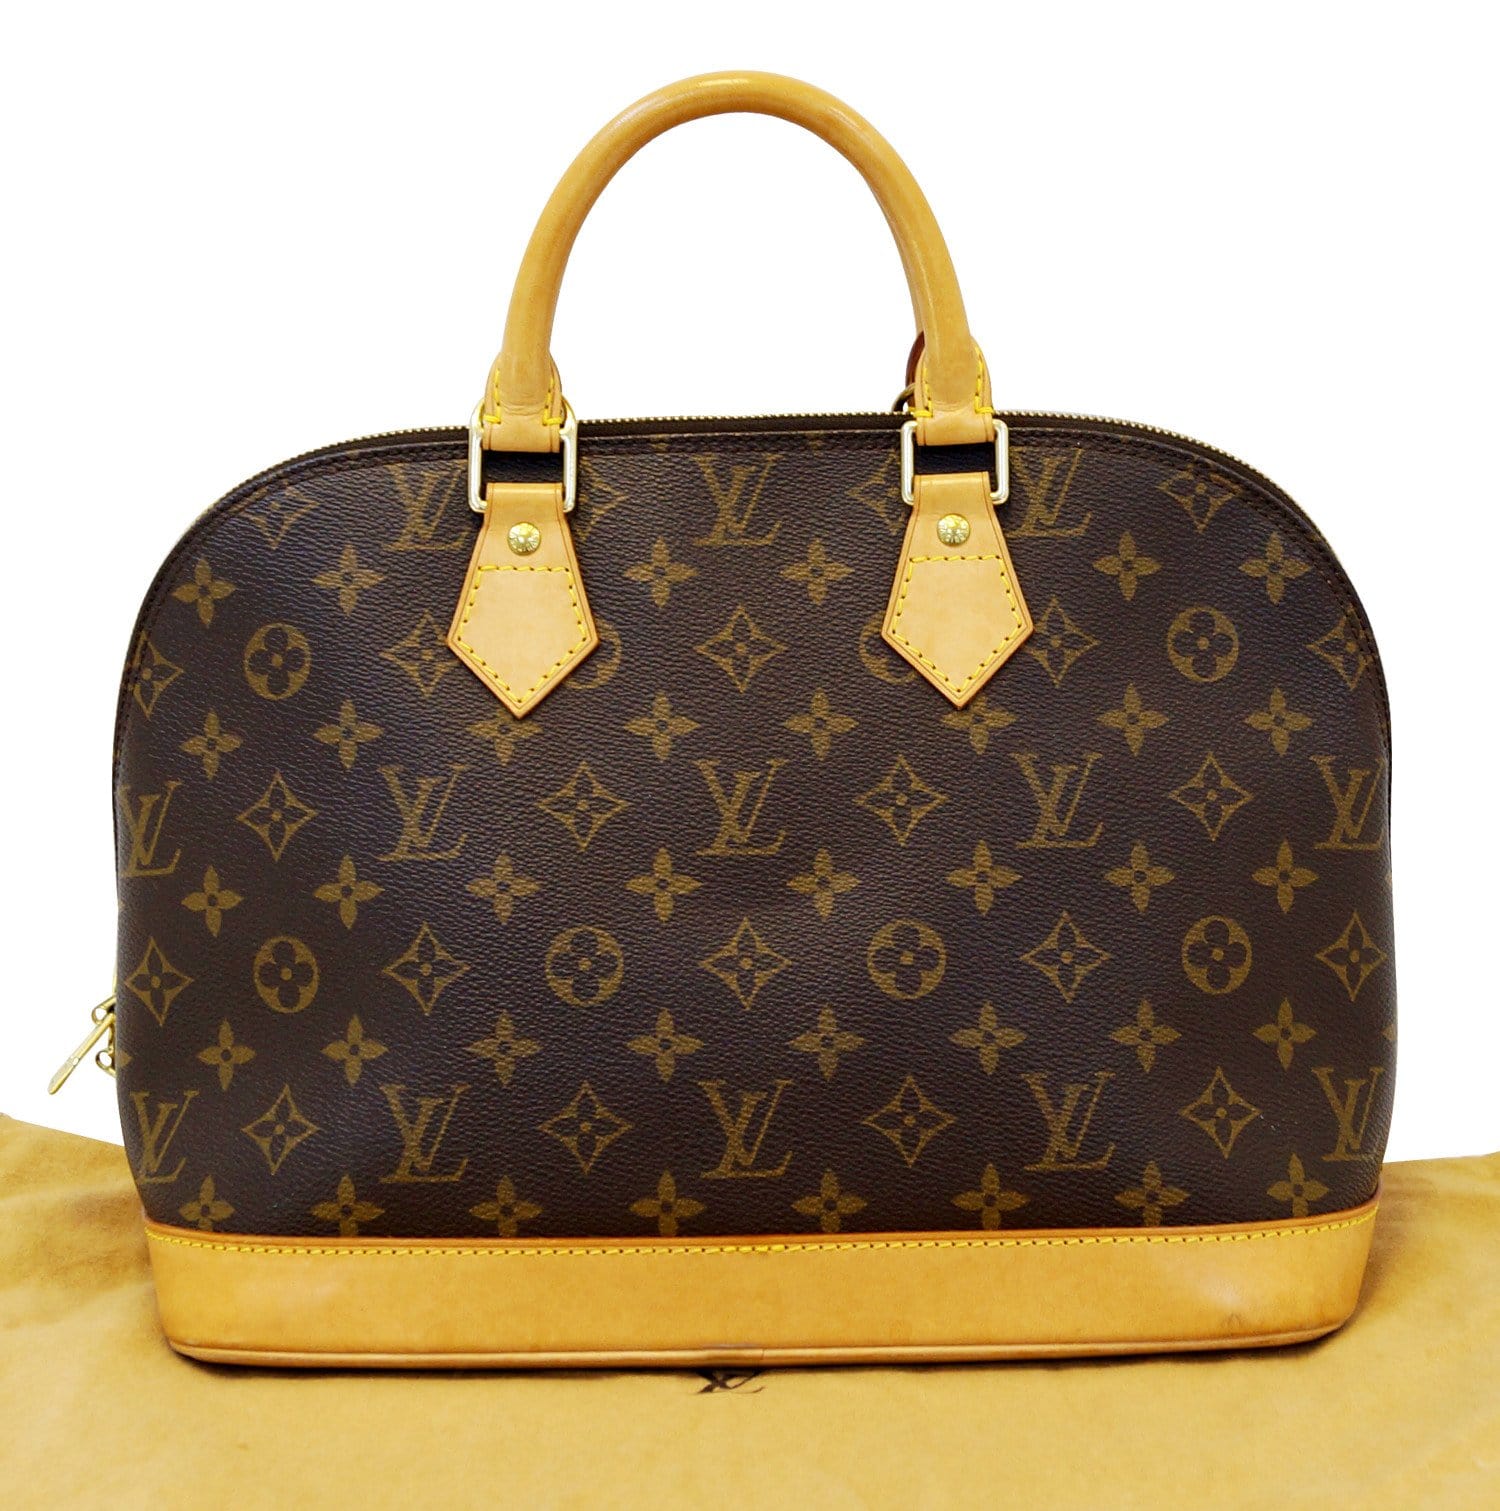 Louis Vuitton Monogram Canvas Alma Bb - Handbag | Pre-owned & Certified | used Second Hand | Unisex